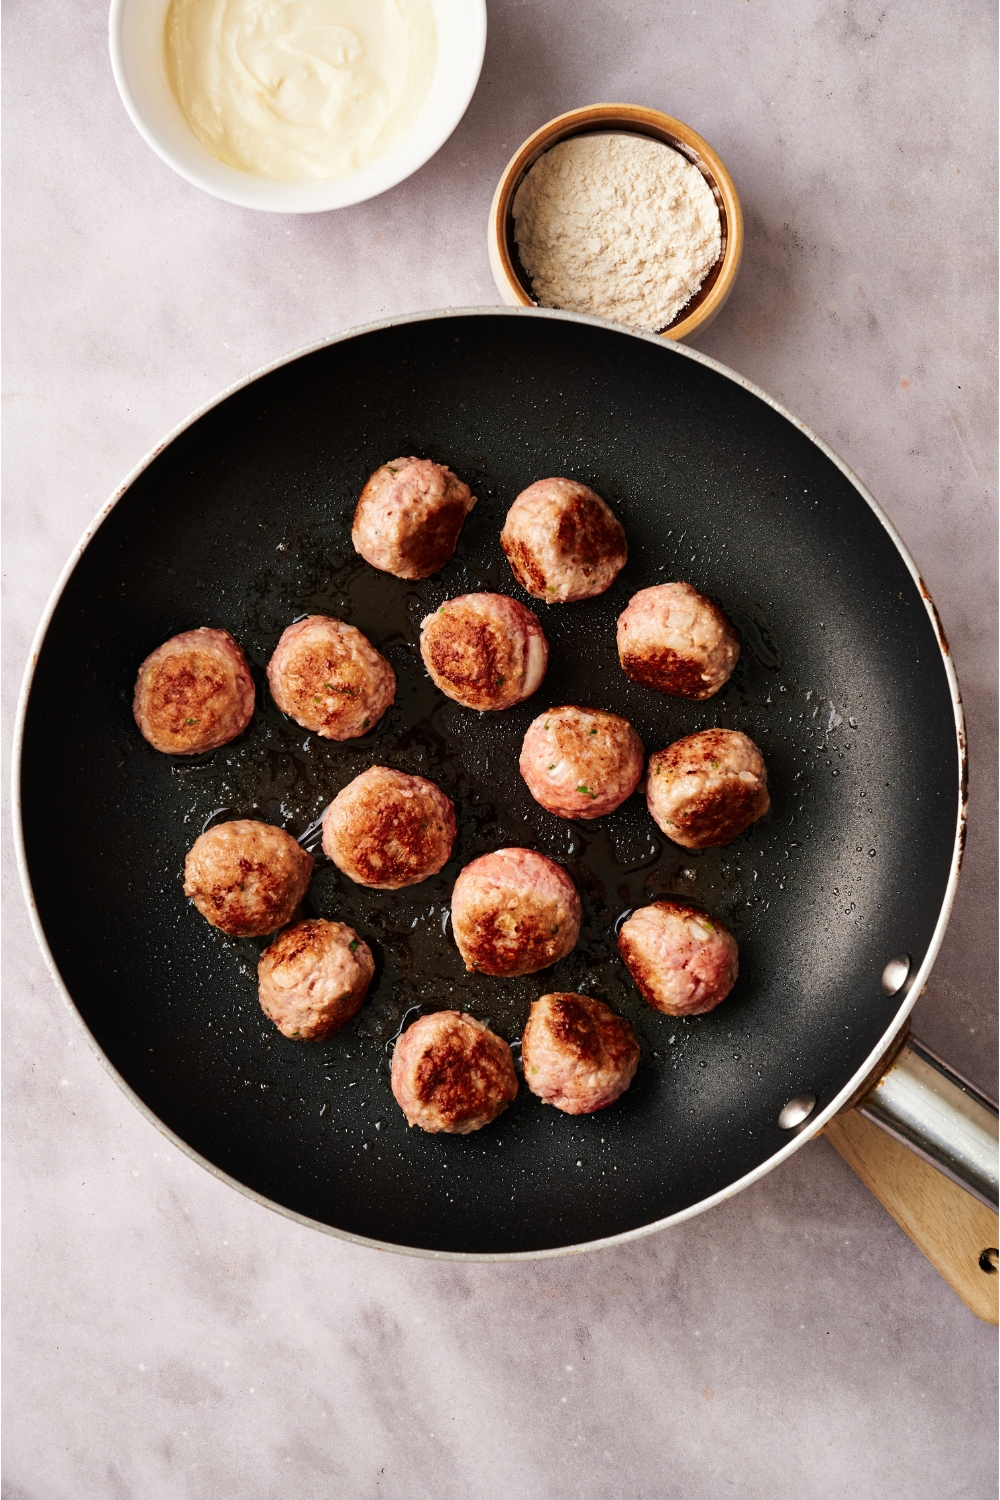 A black skillet filled with meatballs cooking in oil. The meatballs are beginning to brown.